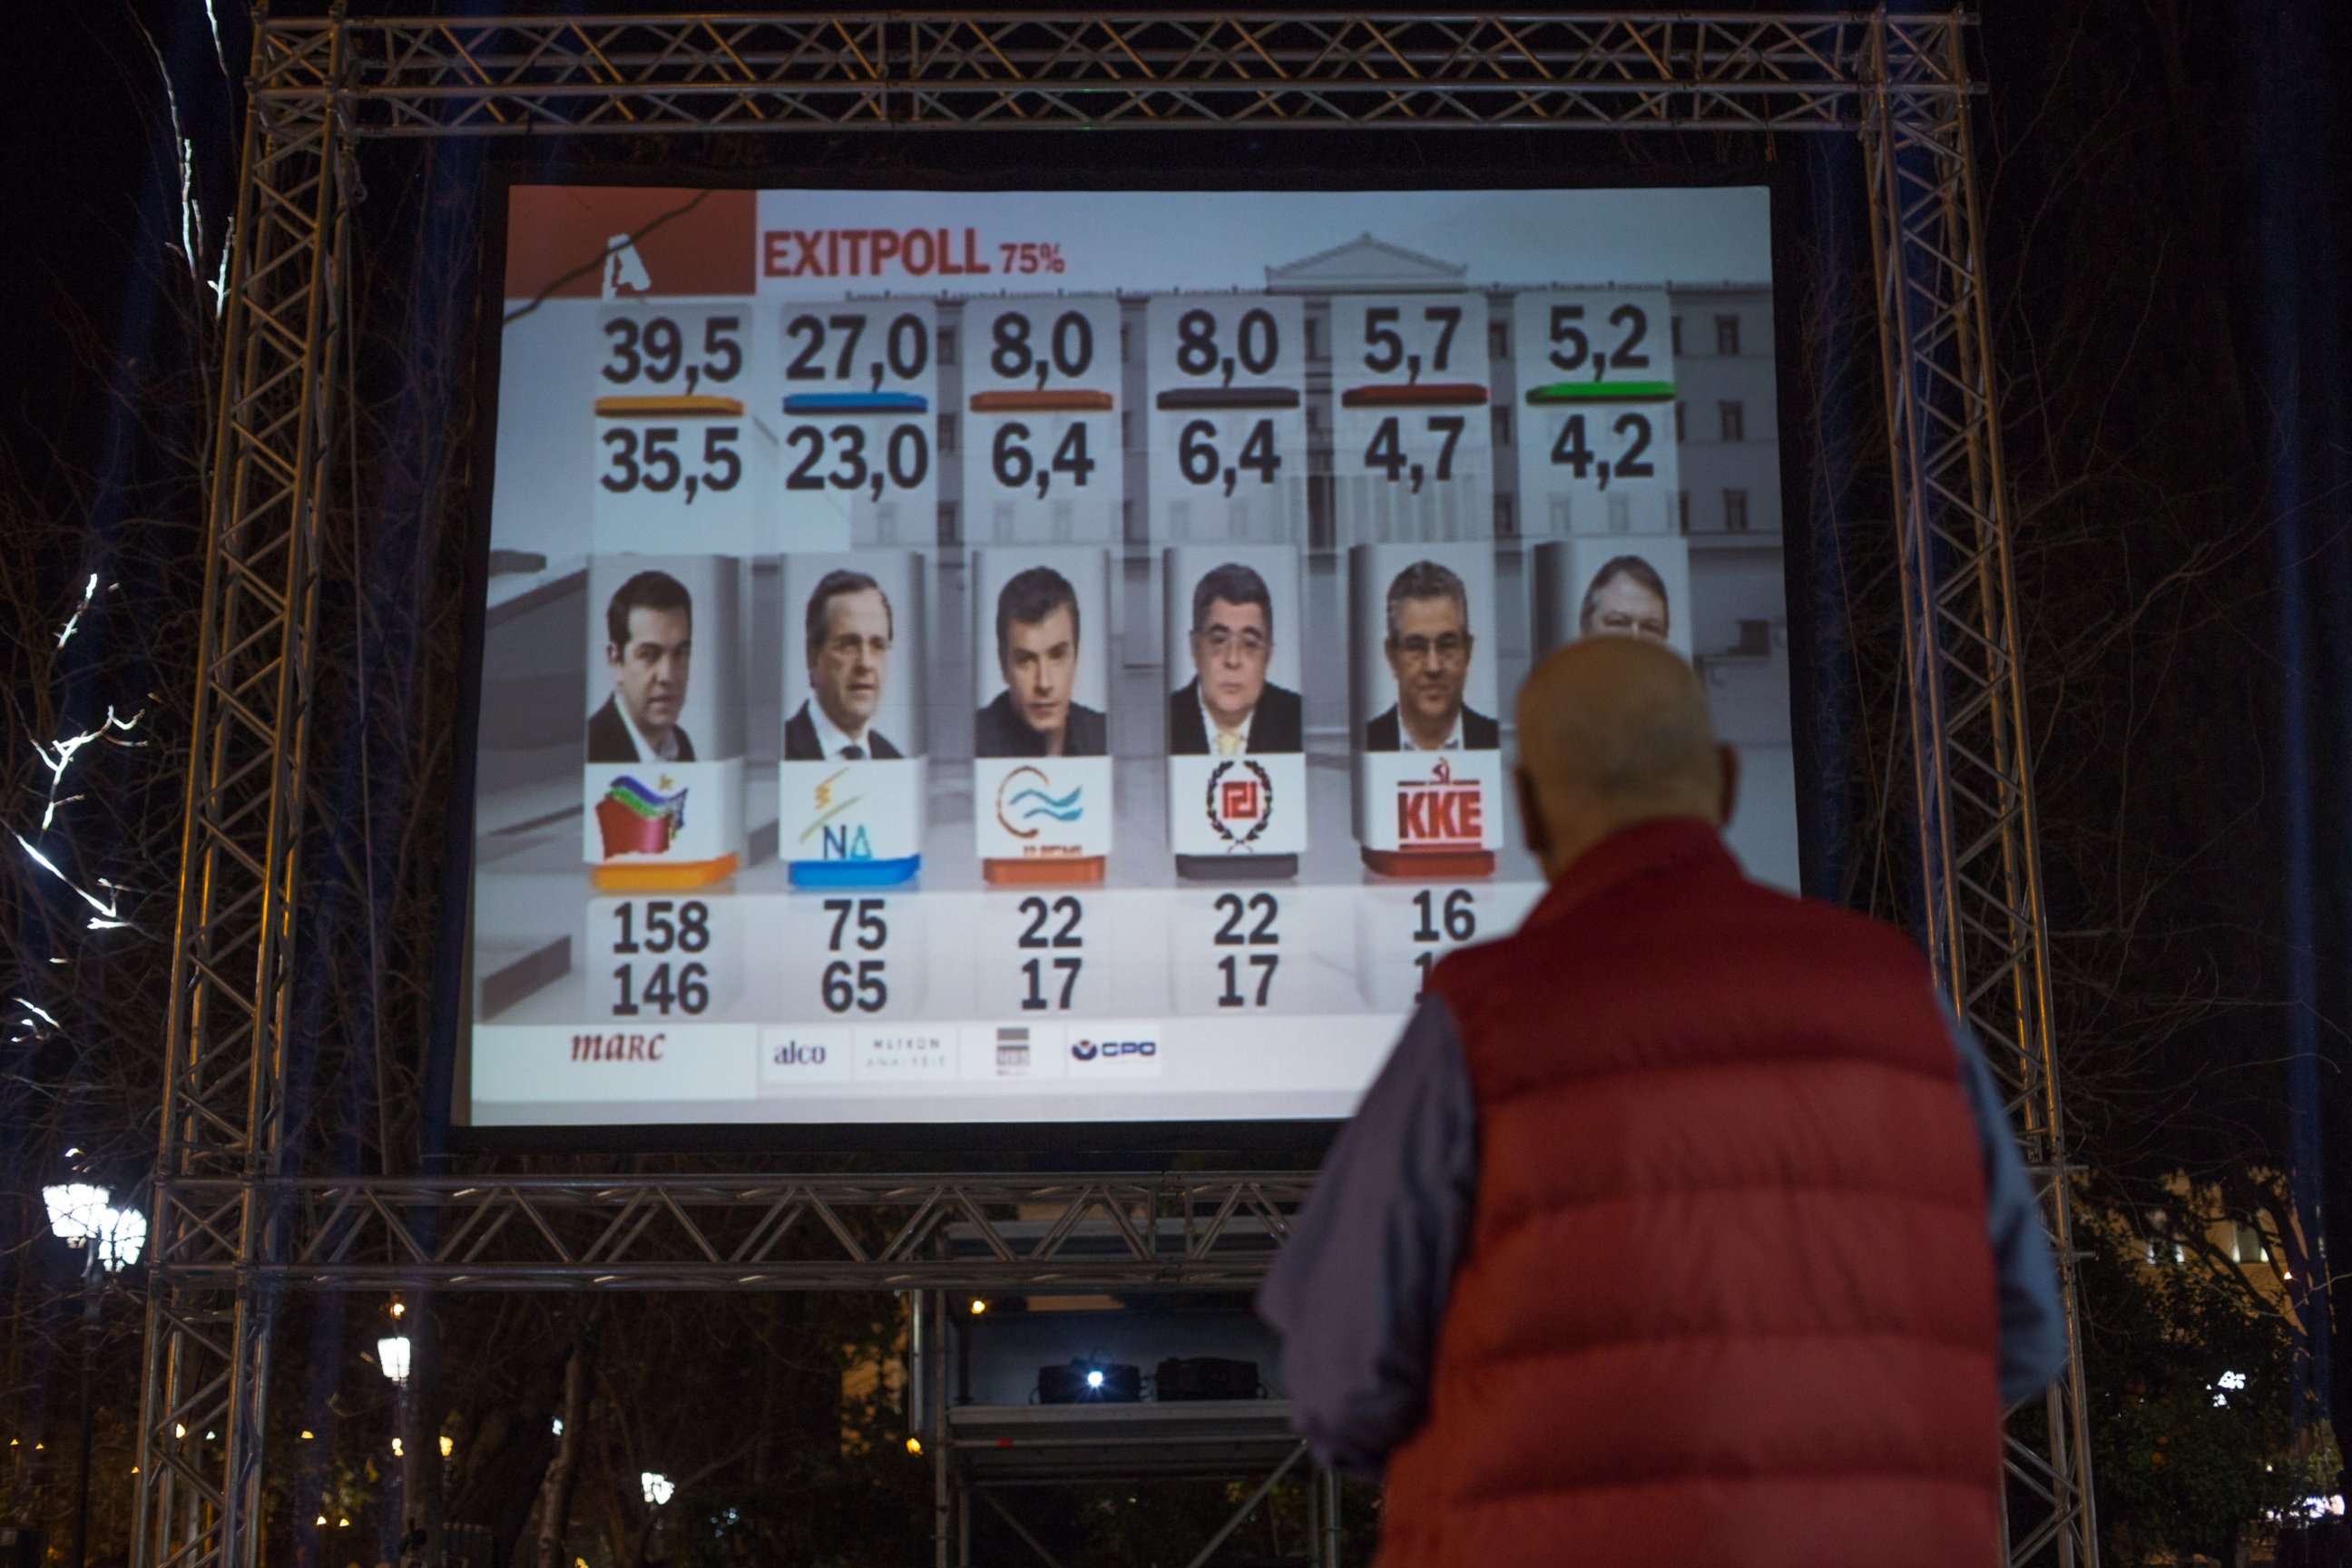 PHOTO: A man looks at a giant screen showing a exit poll, Jan. 25, 2015 in Athens, Greece. 